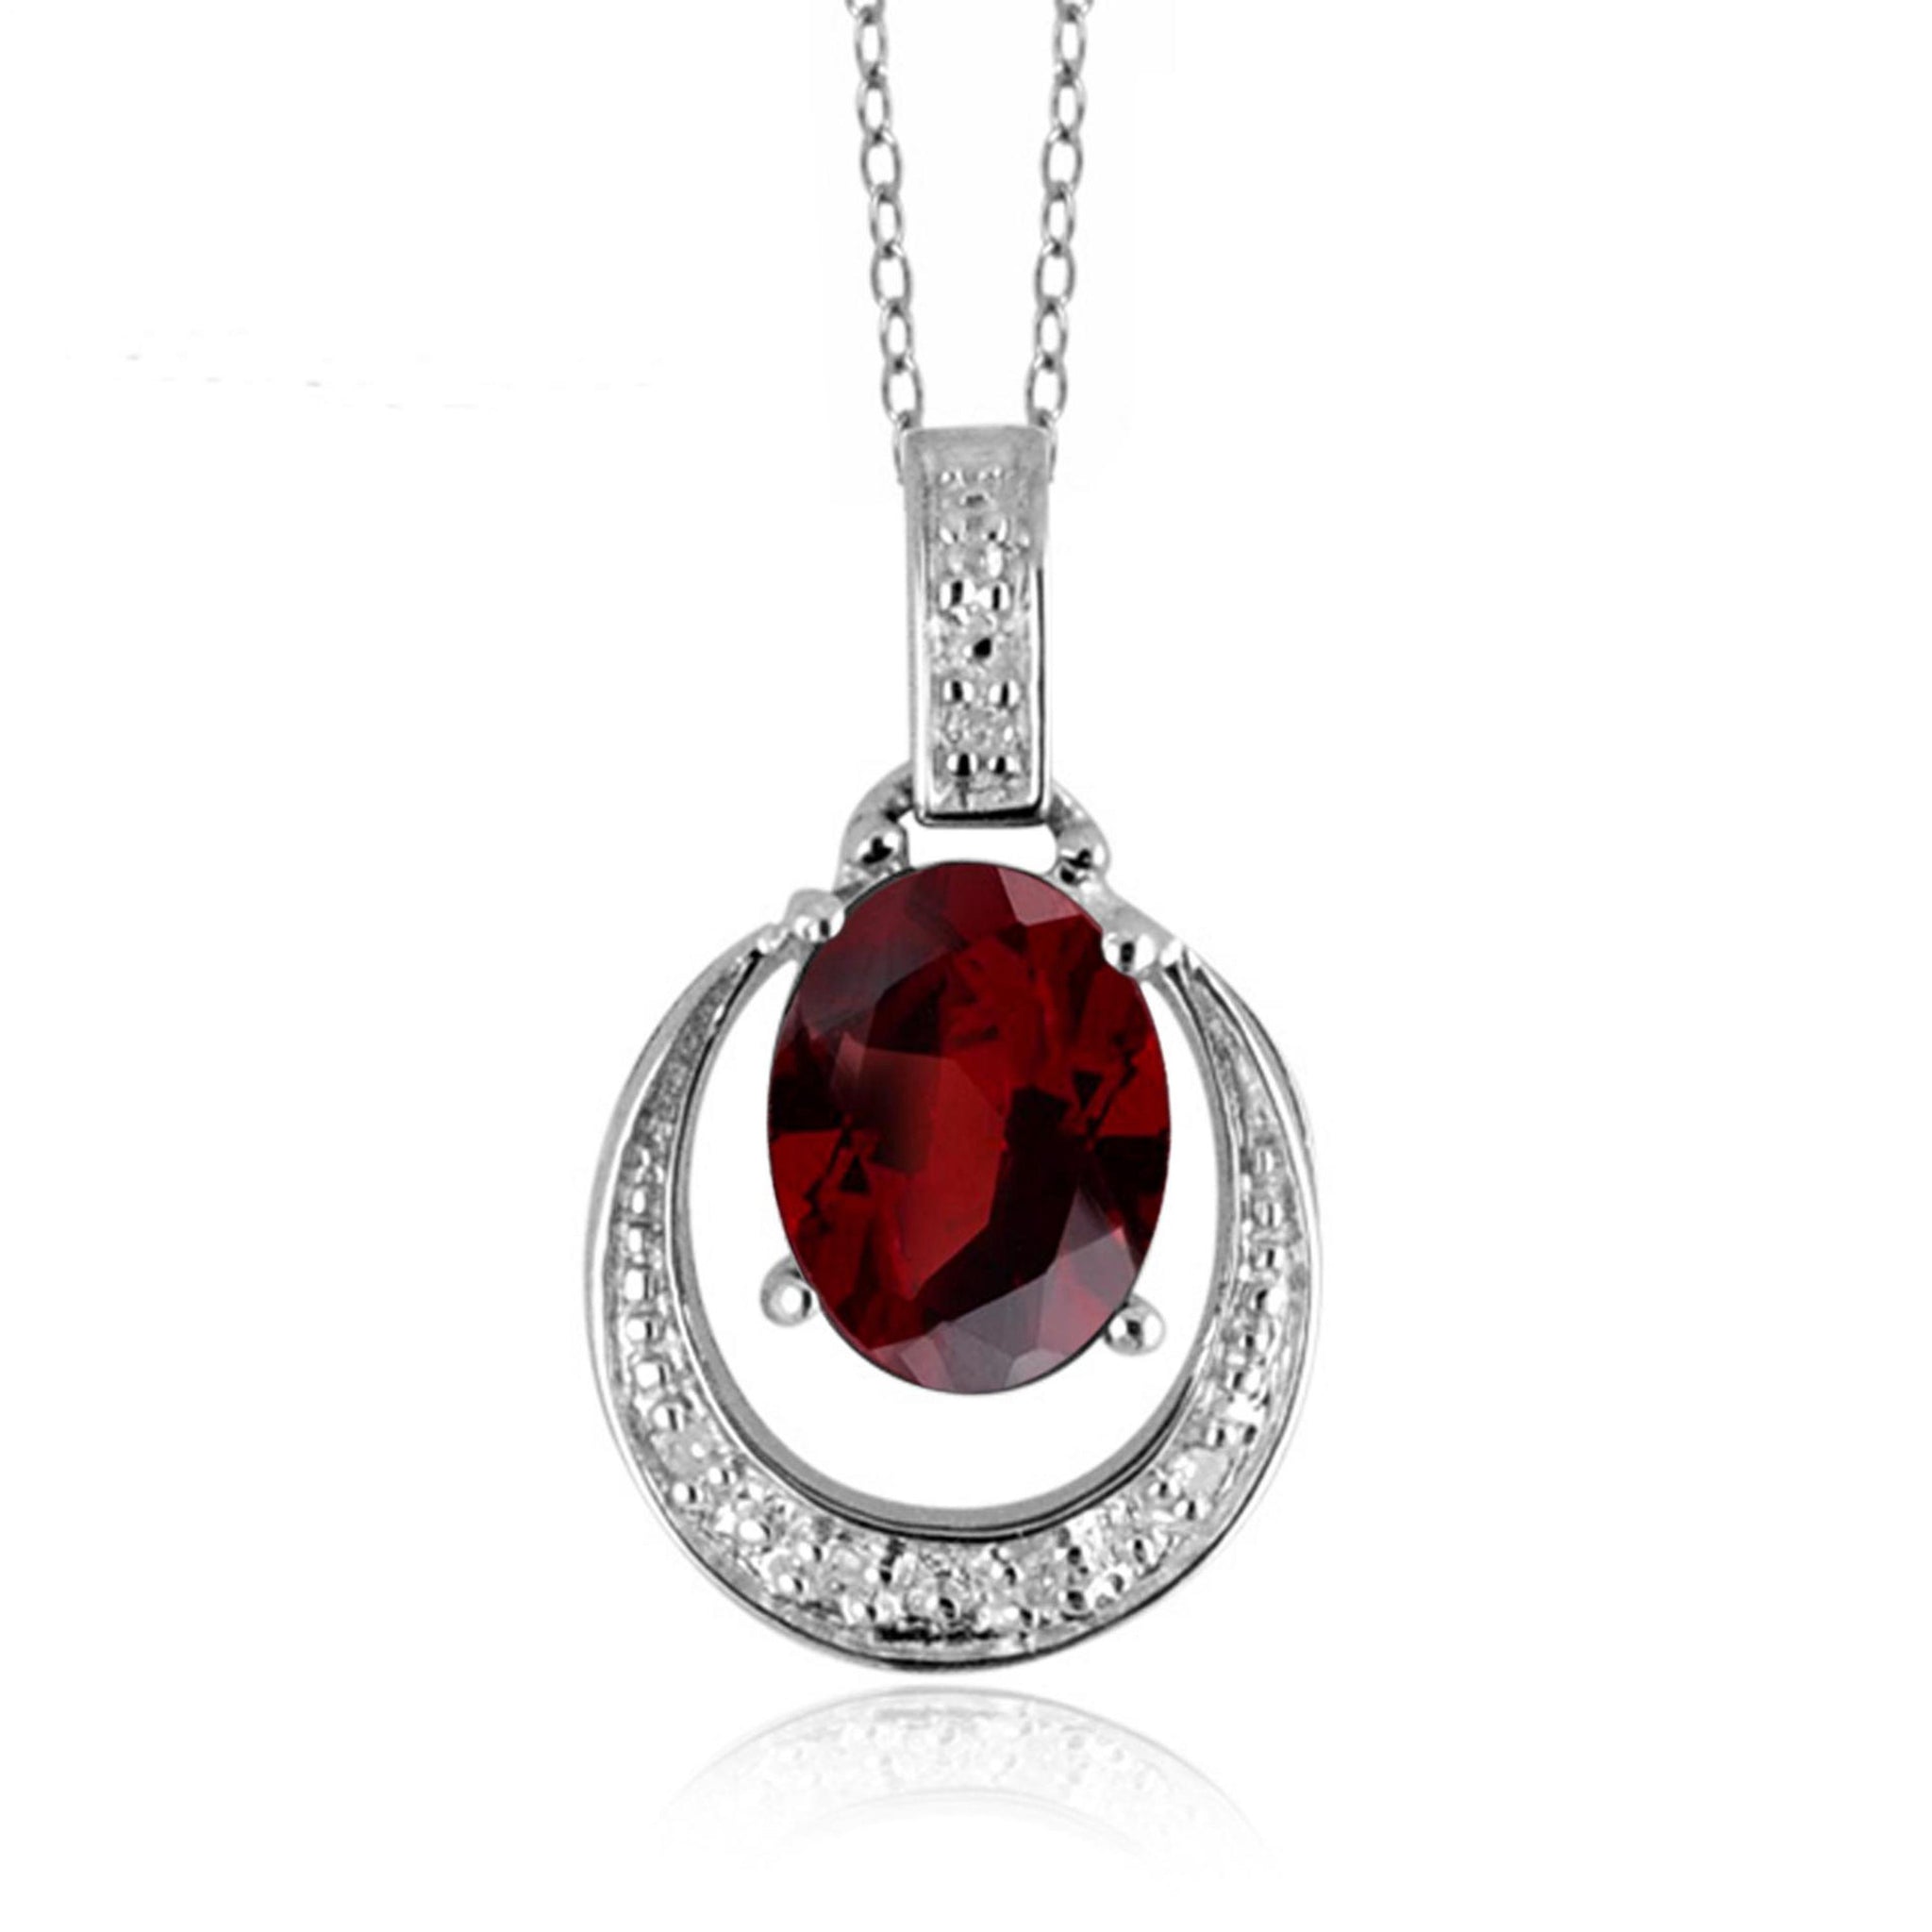 JewelonFire 1 1/2 Carat T.G.W. Garnet And 1/20 Carat T.W. White Diamond Sterling Silver Pendant - Assorted Colors